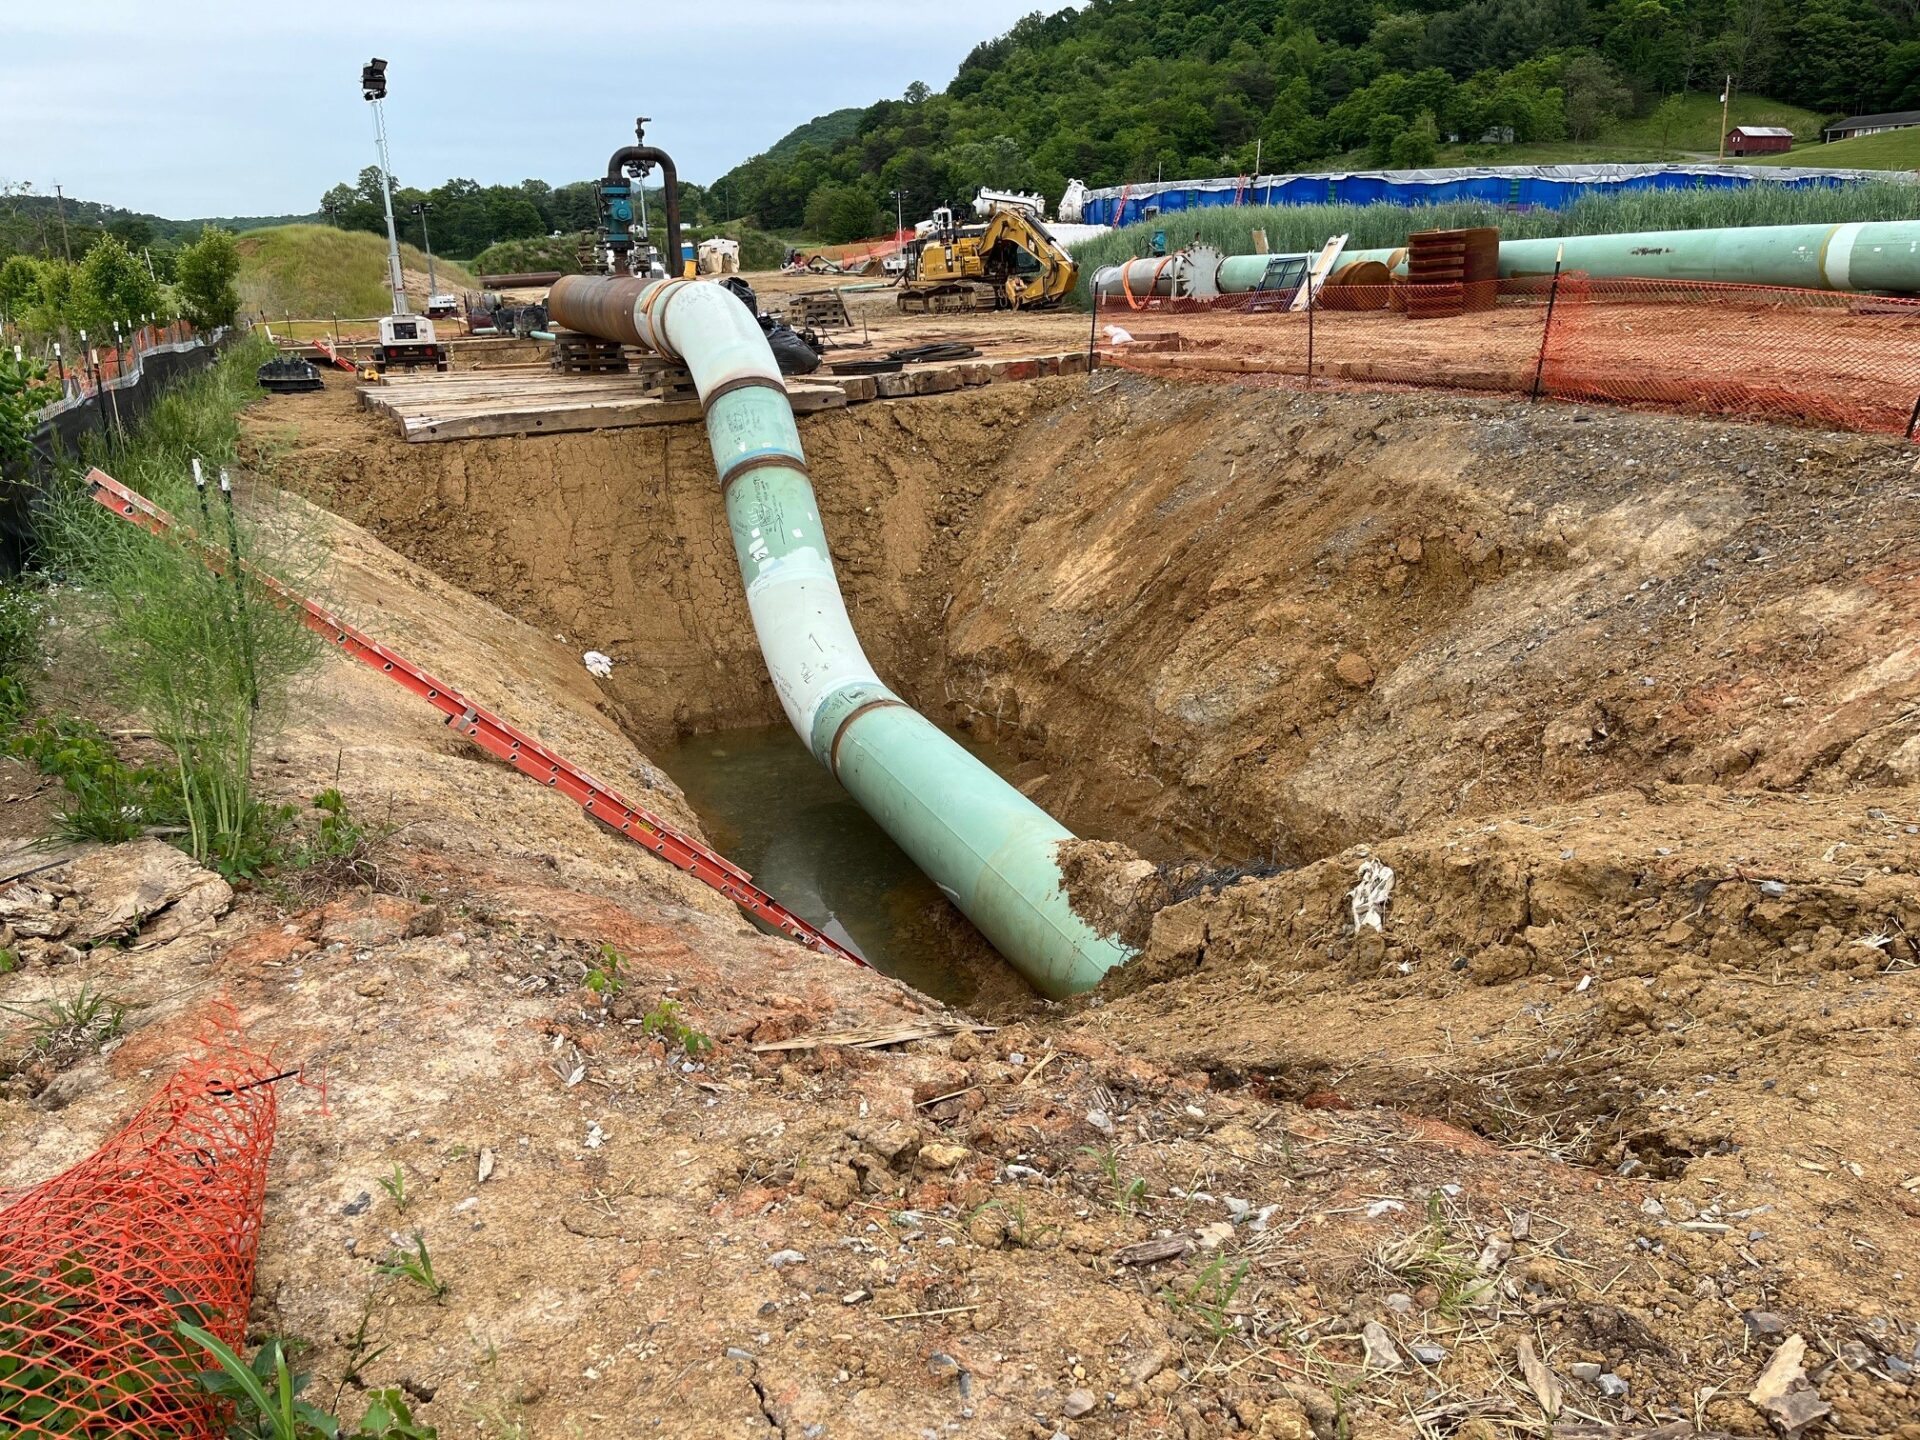 A Week After Mountain Valley Pipeline Burst, Builder Says Testing Works